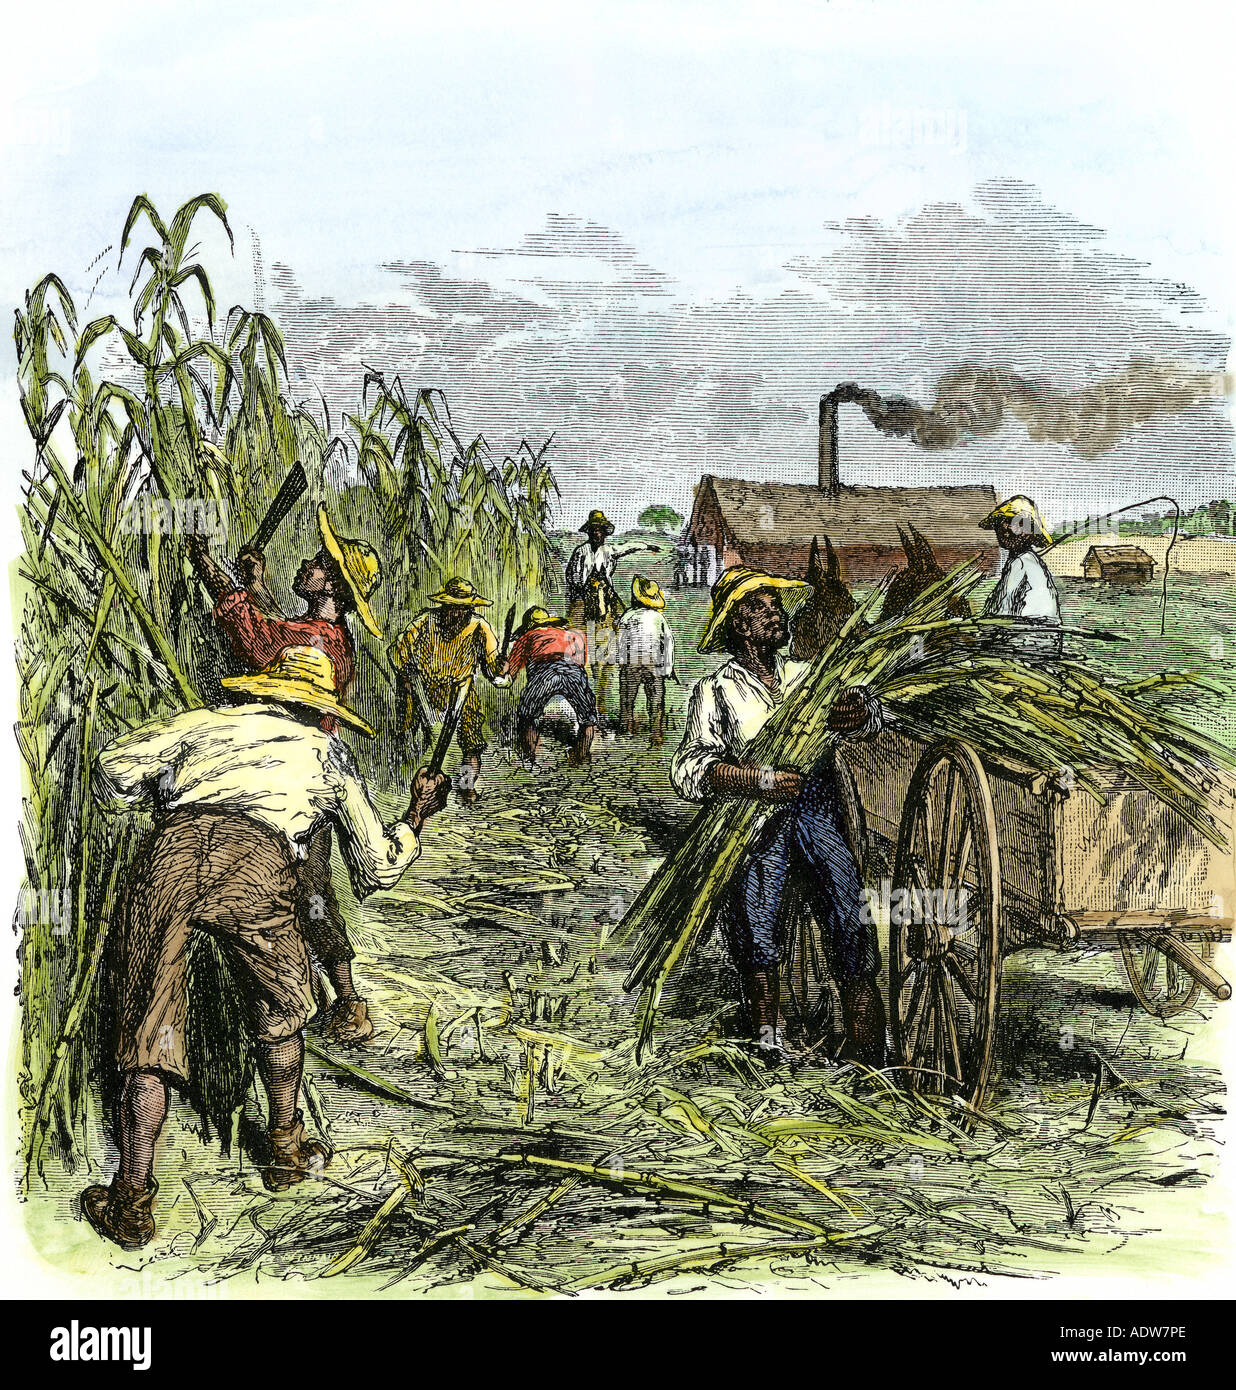 Black slaves harvesting sugar cane on a plantation in the US South 1800s. Hand-colored woodcut Stock Photo